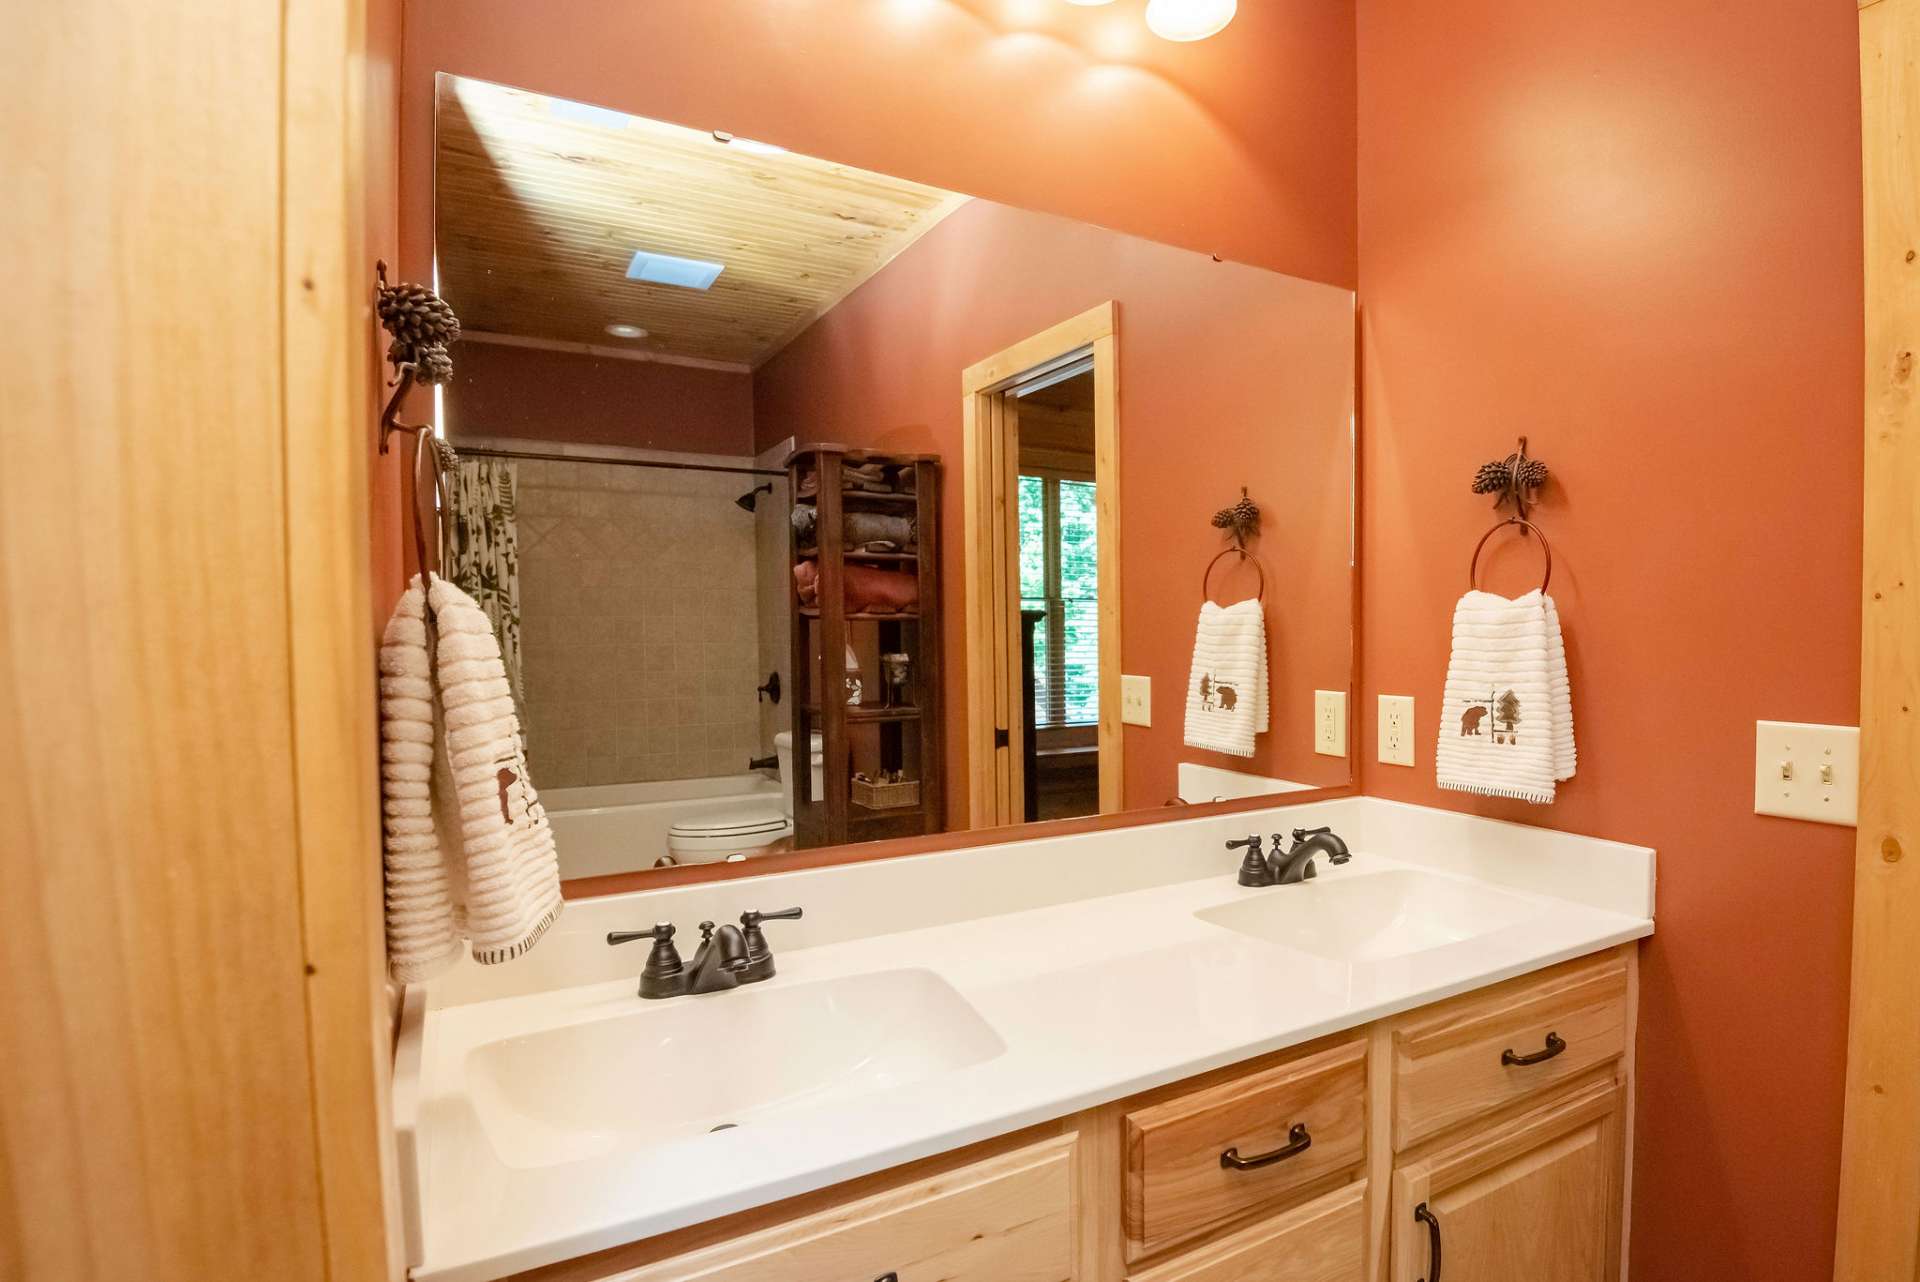 Shared bath with double sinks between the upper level bedrooms.